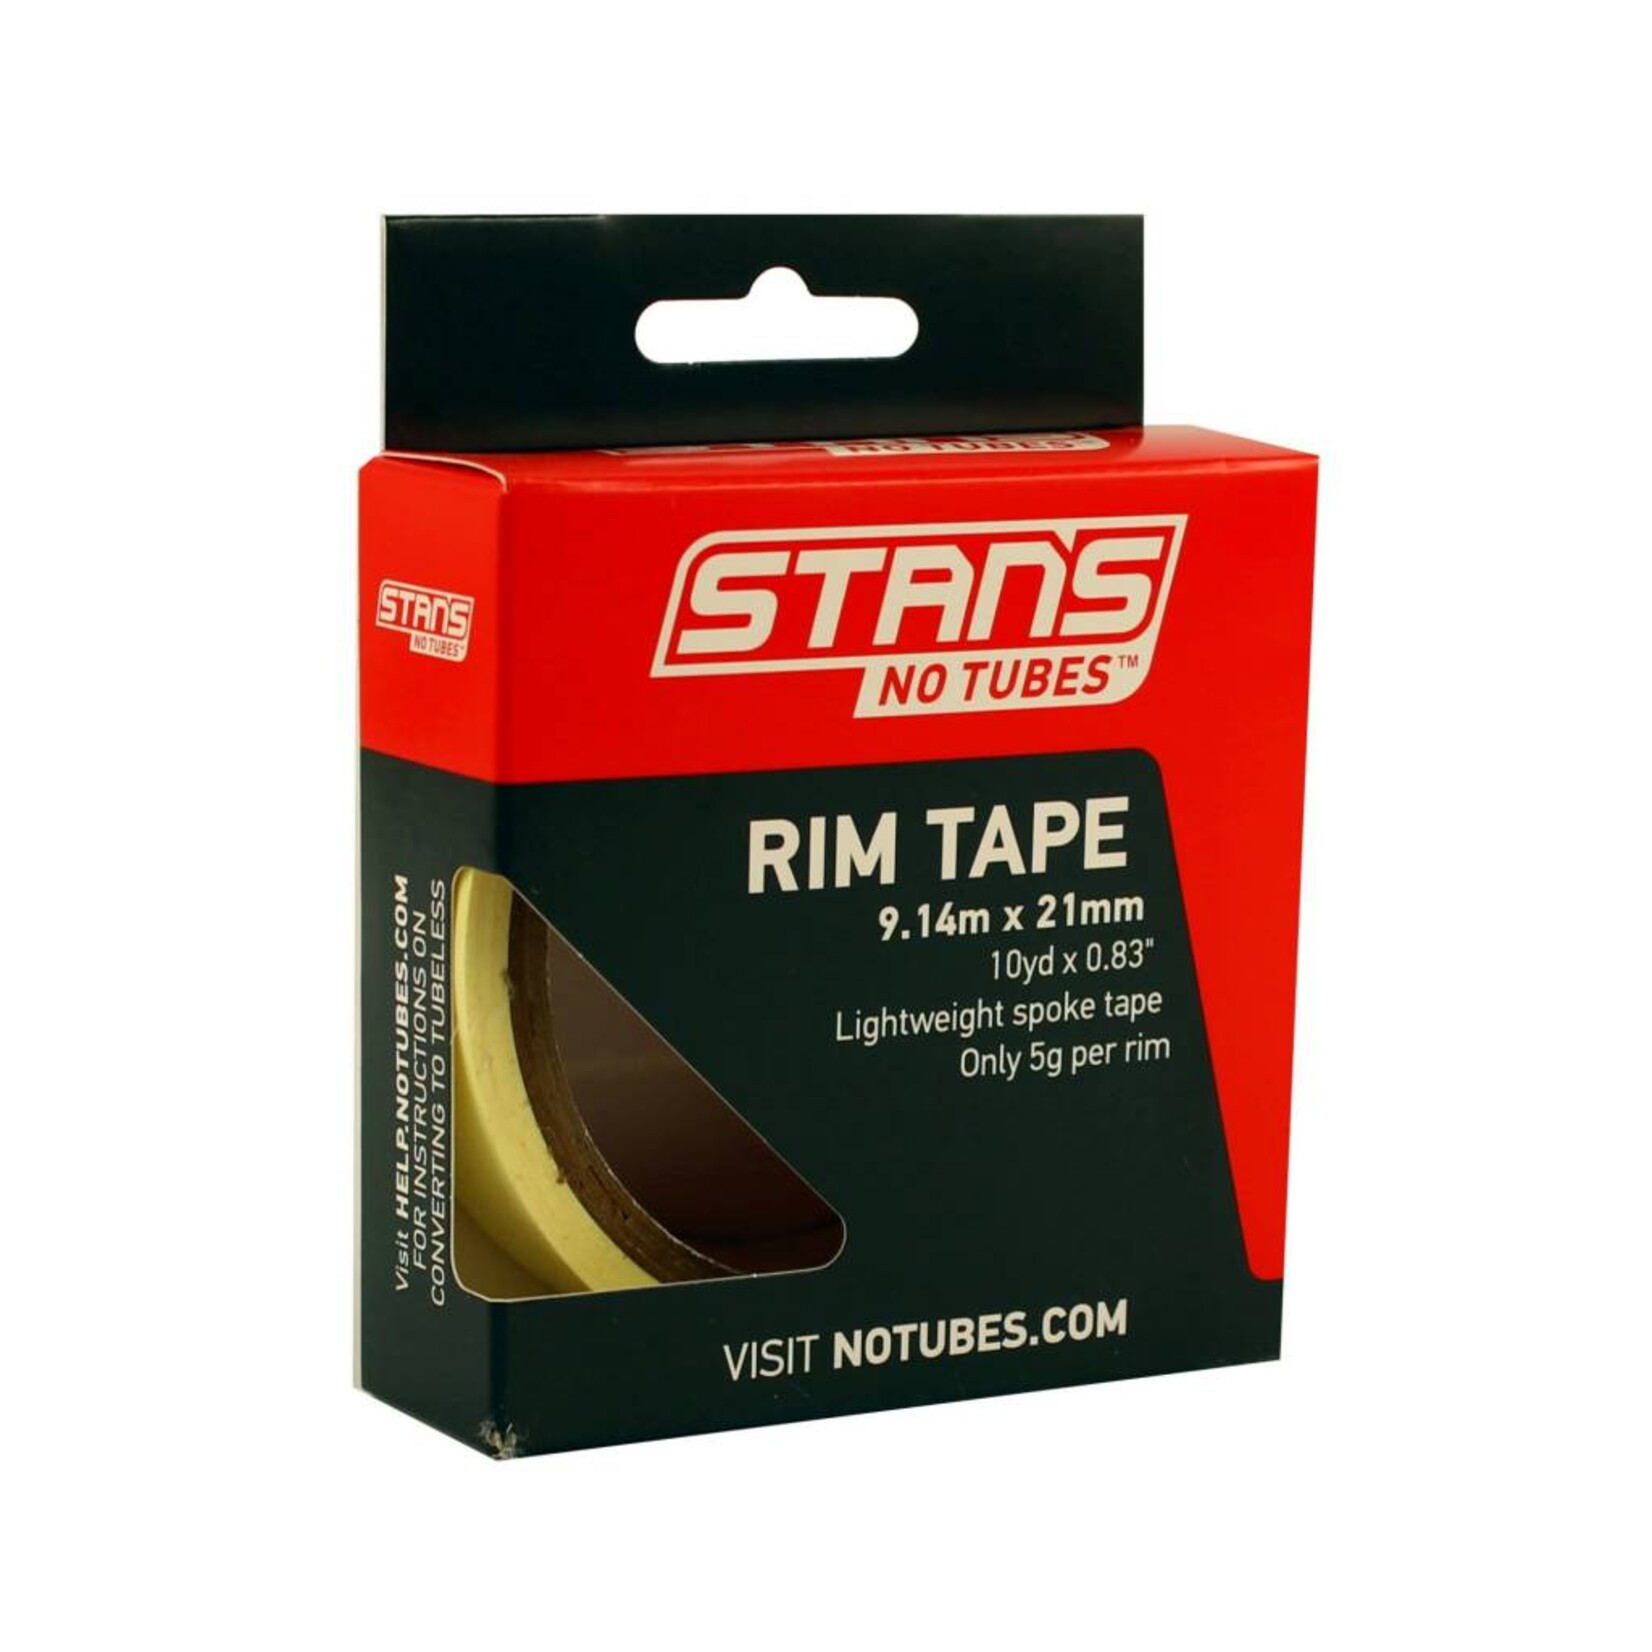 Stans No Tubes Tubless Rim Tape, 21mm, 10 yards